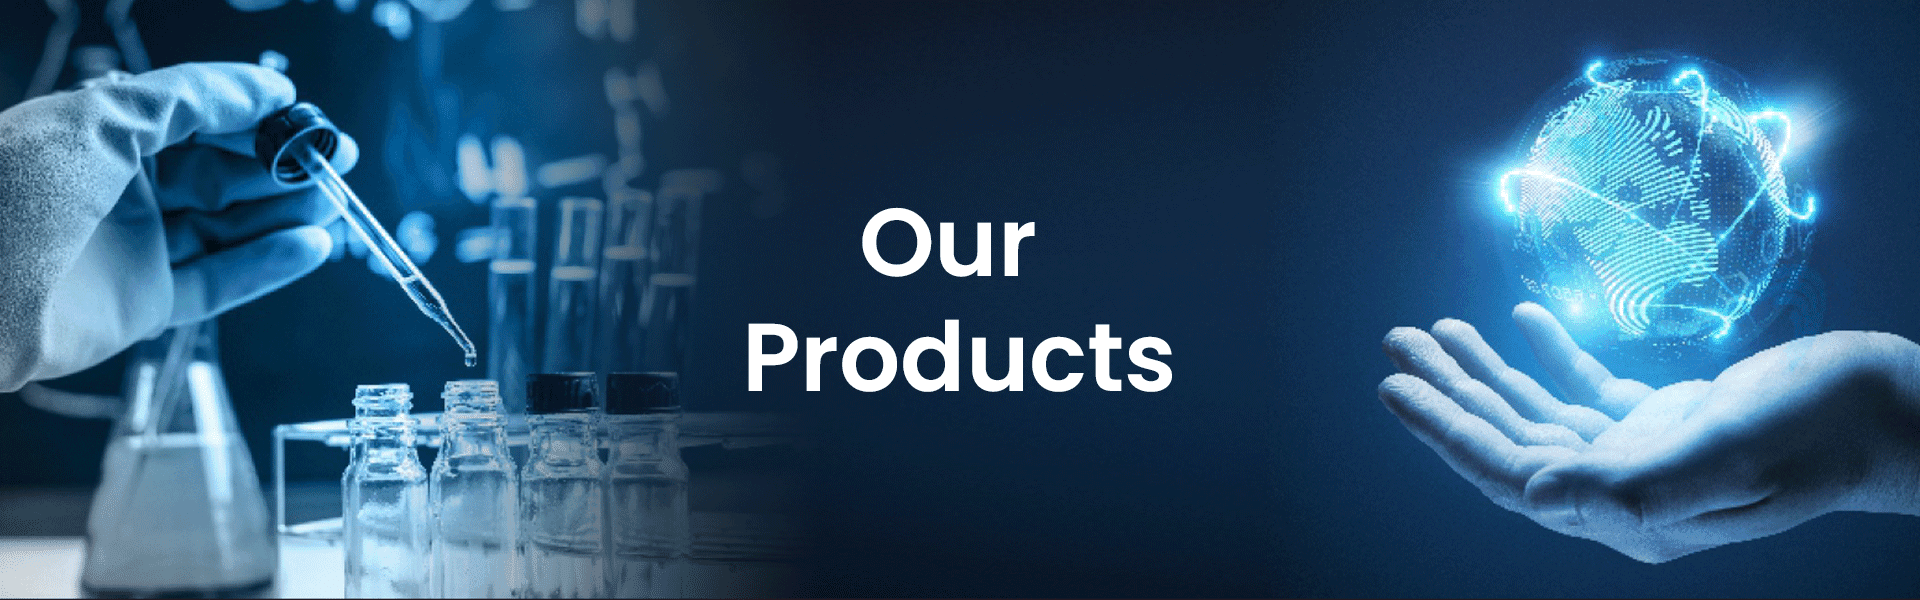 Our products –